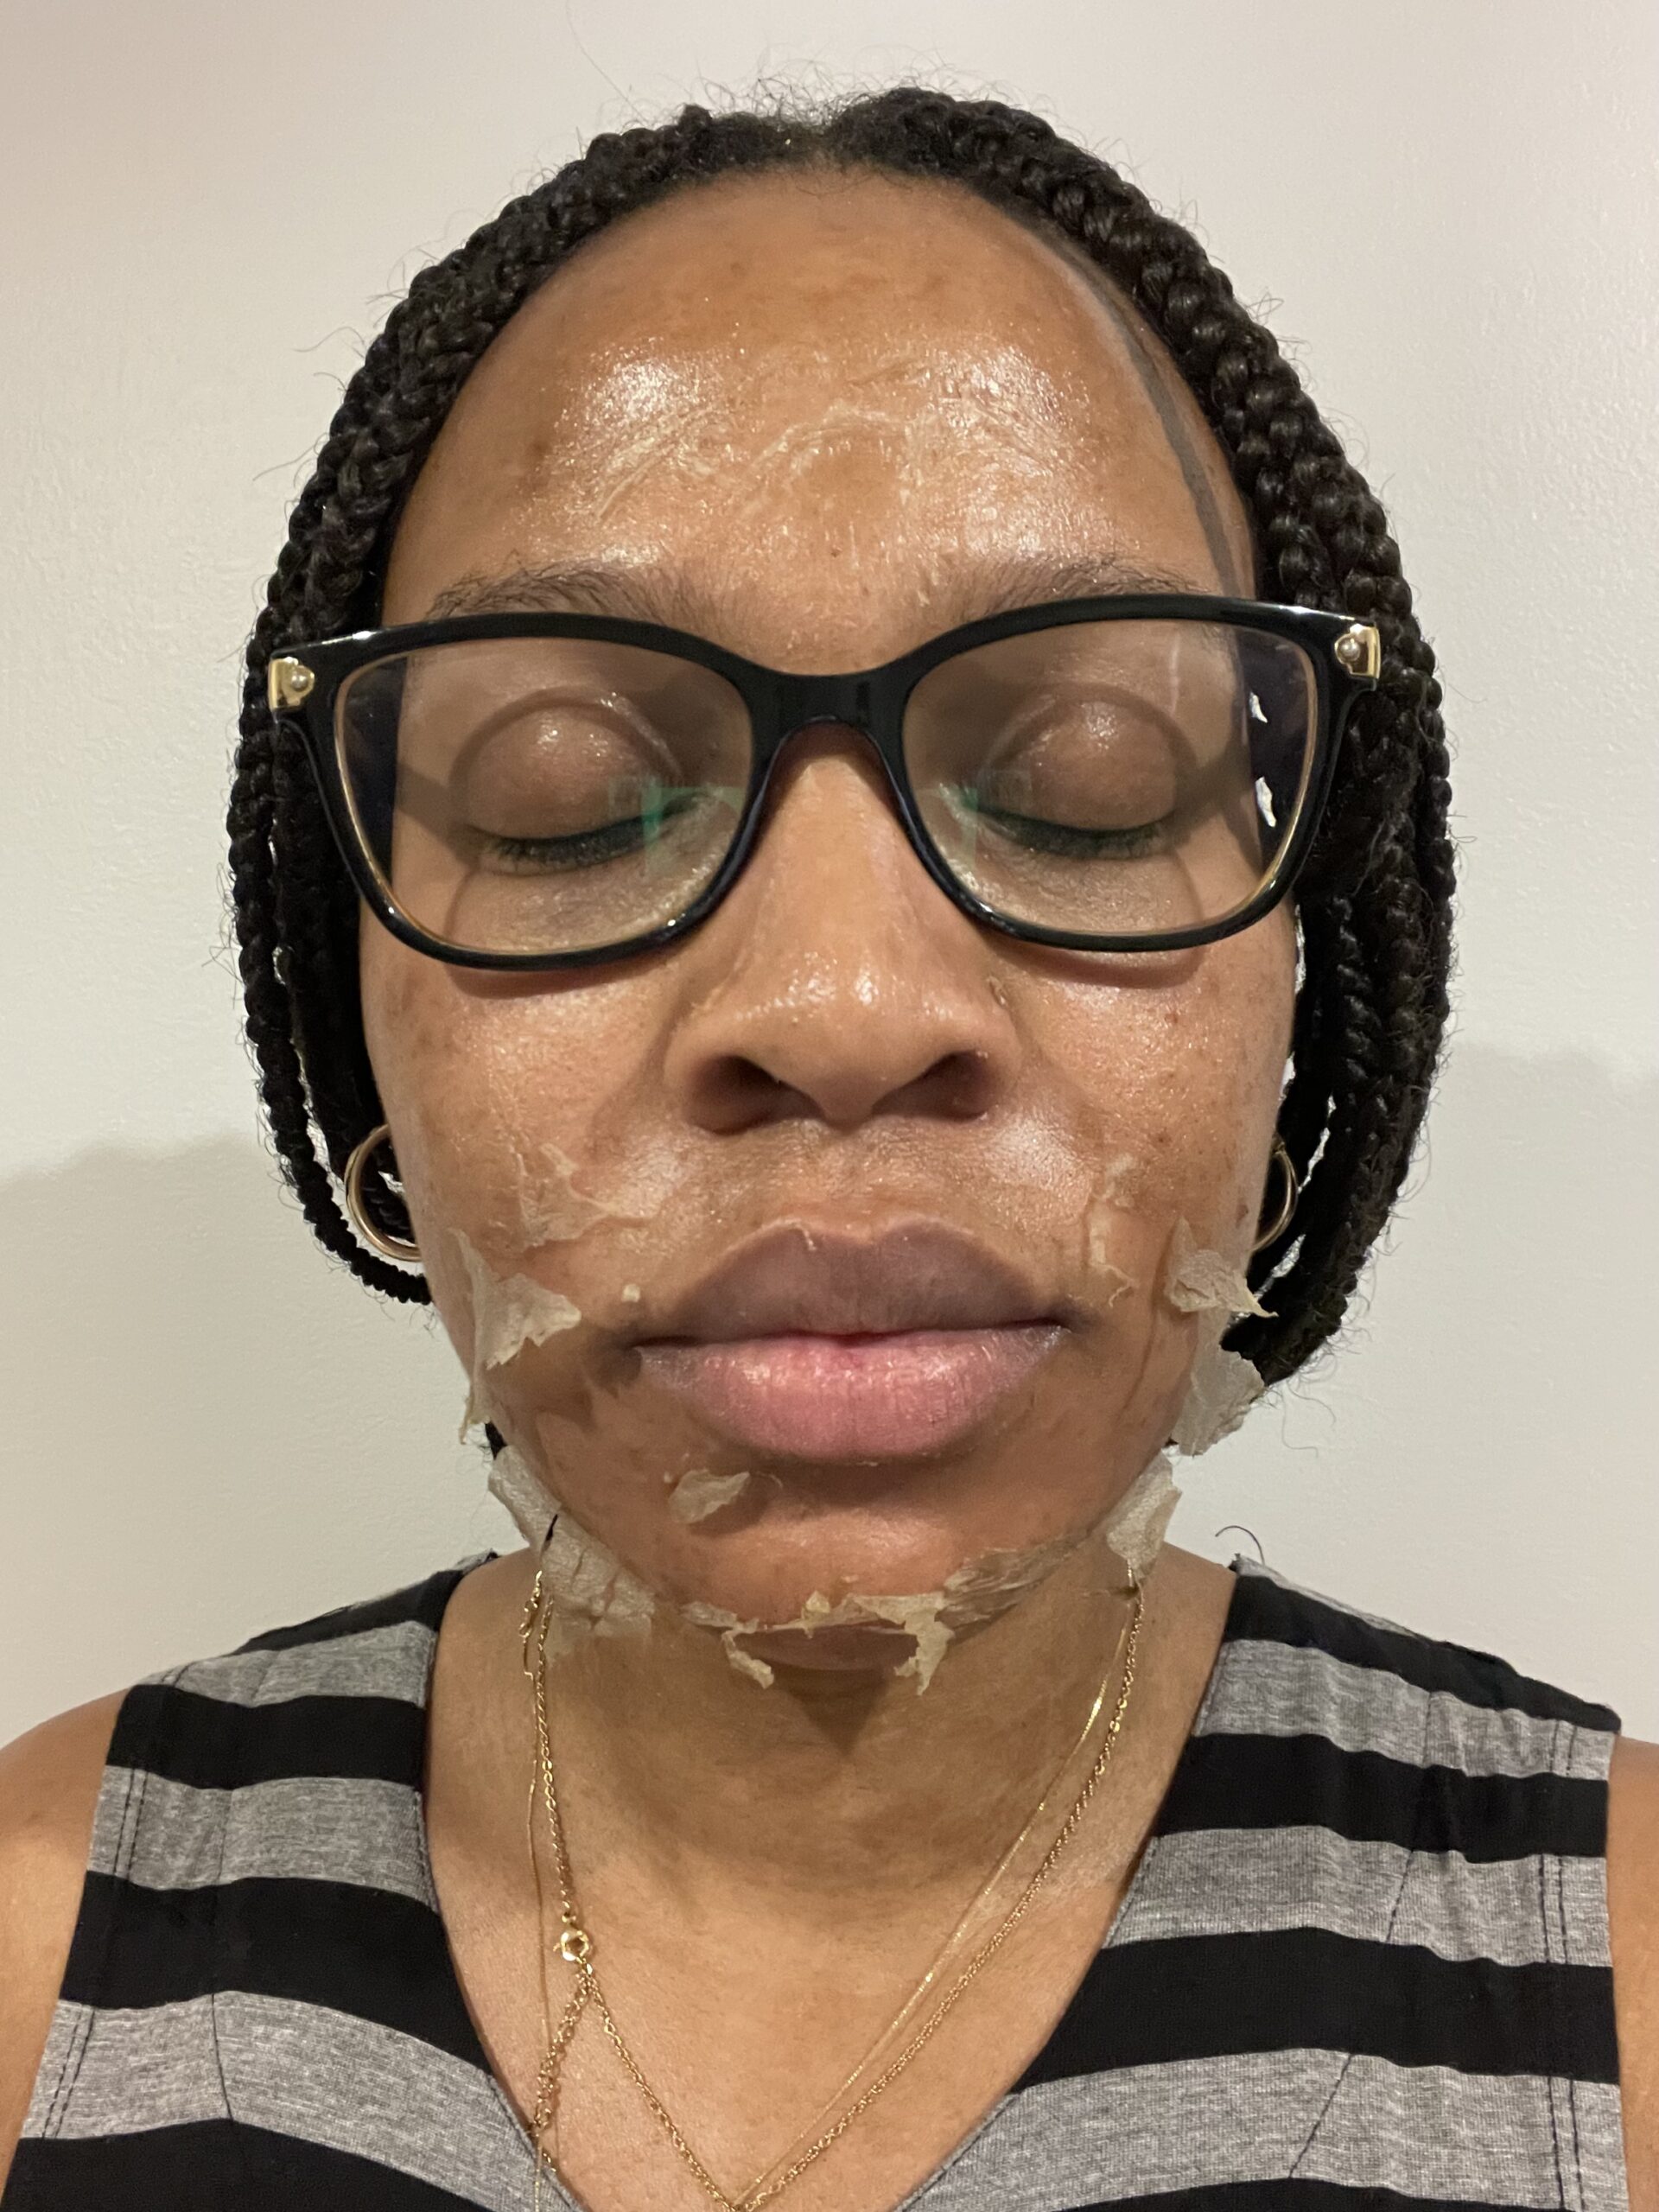 home made chemical facial peel Adult Pics Hq